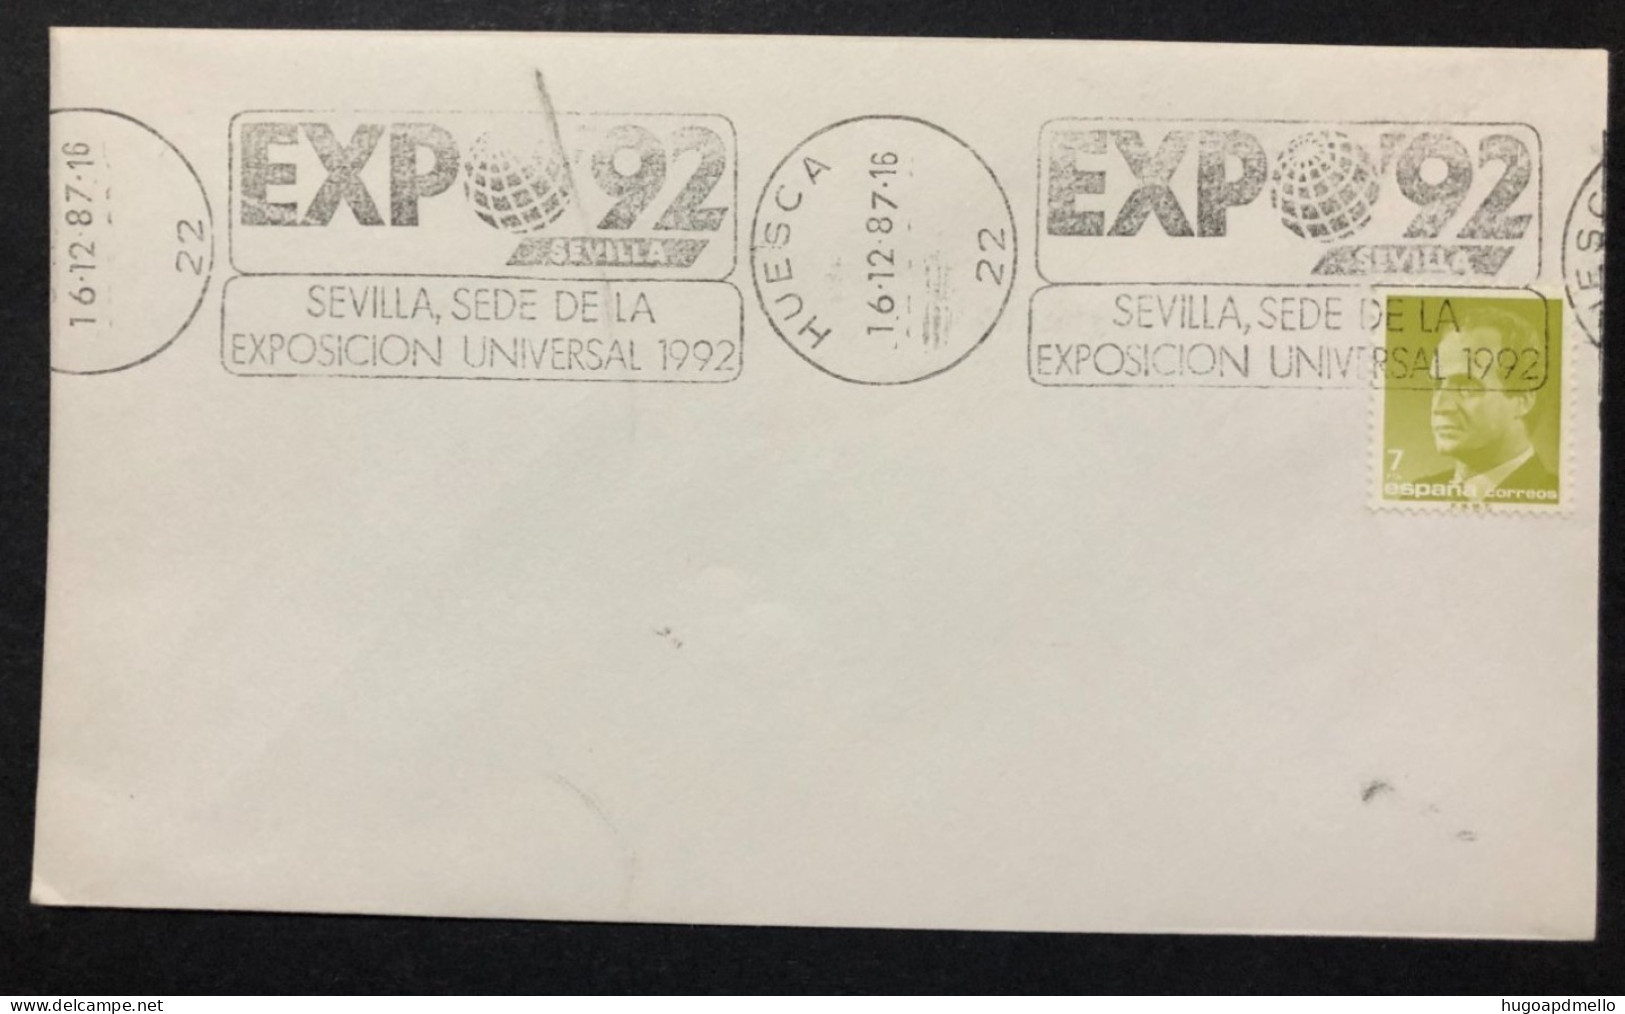 SPAIN, Cover With Special Cancellation « EXPO '92 », « HUESCA Postmark », 1987 - 1992 – Séville (Espagne)